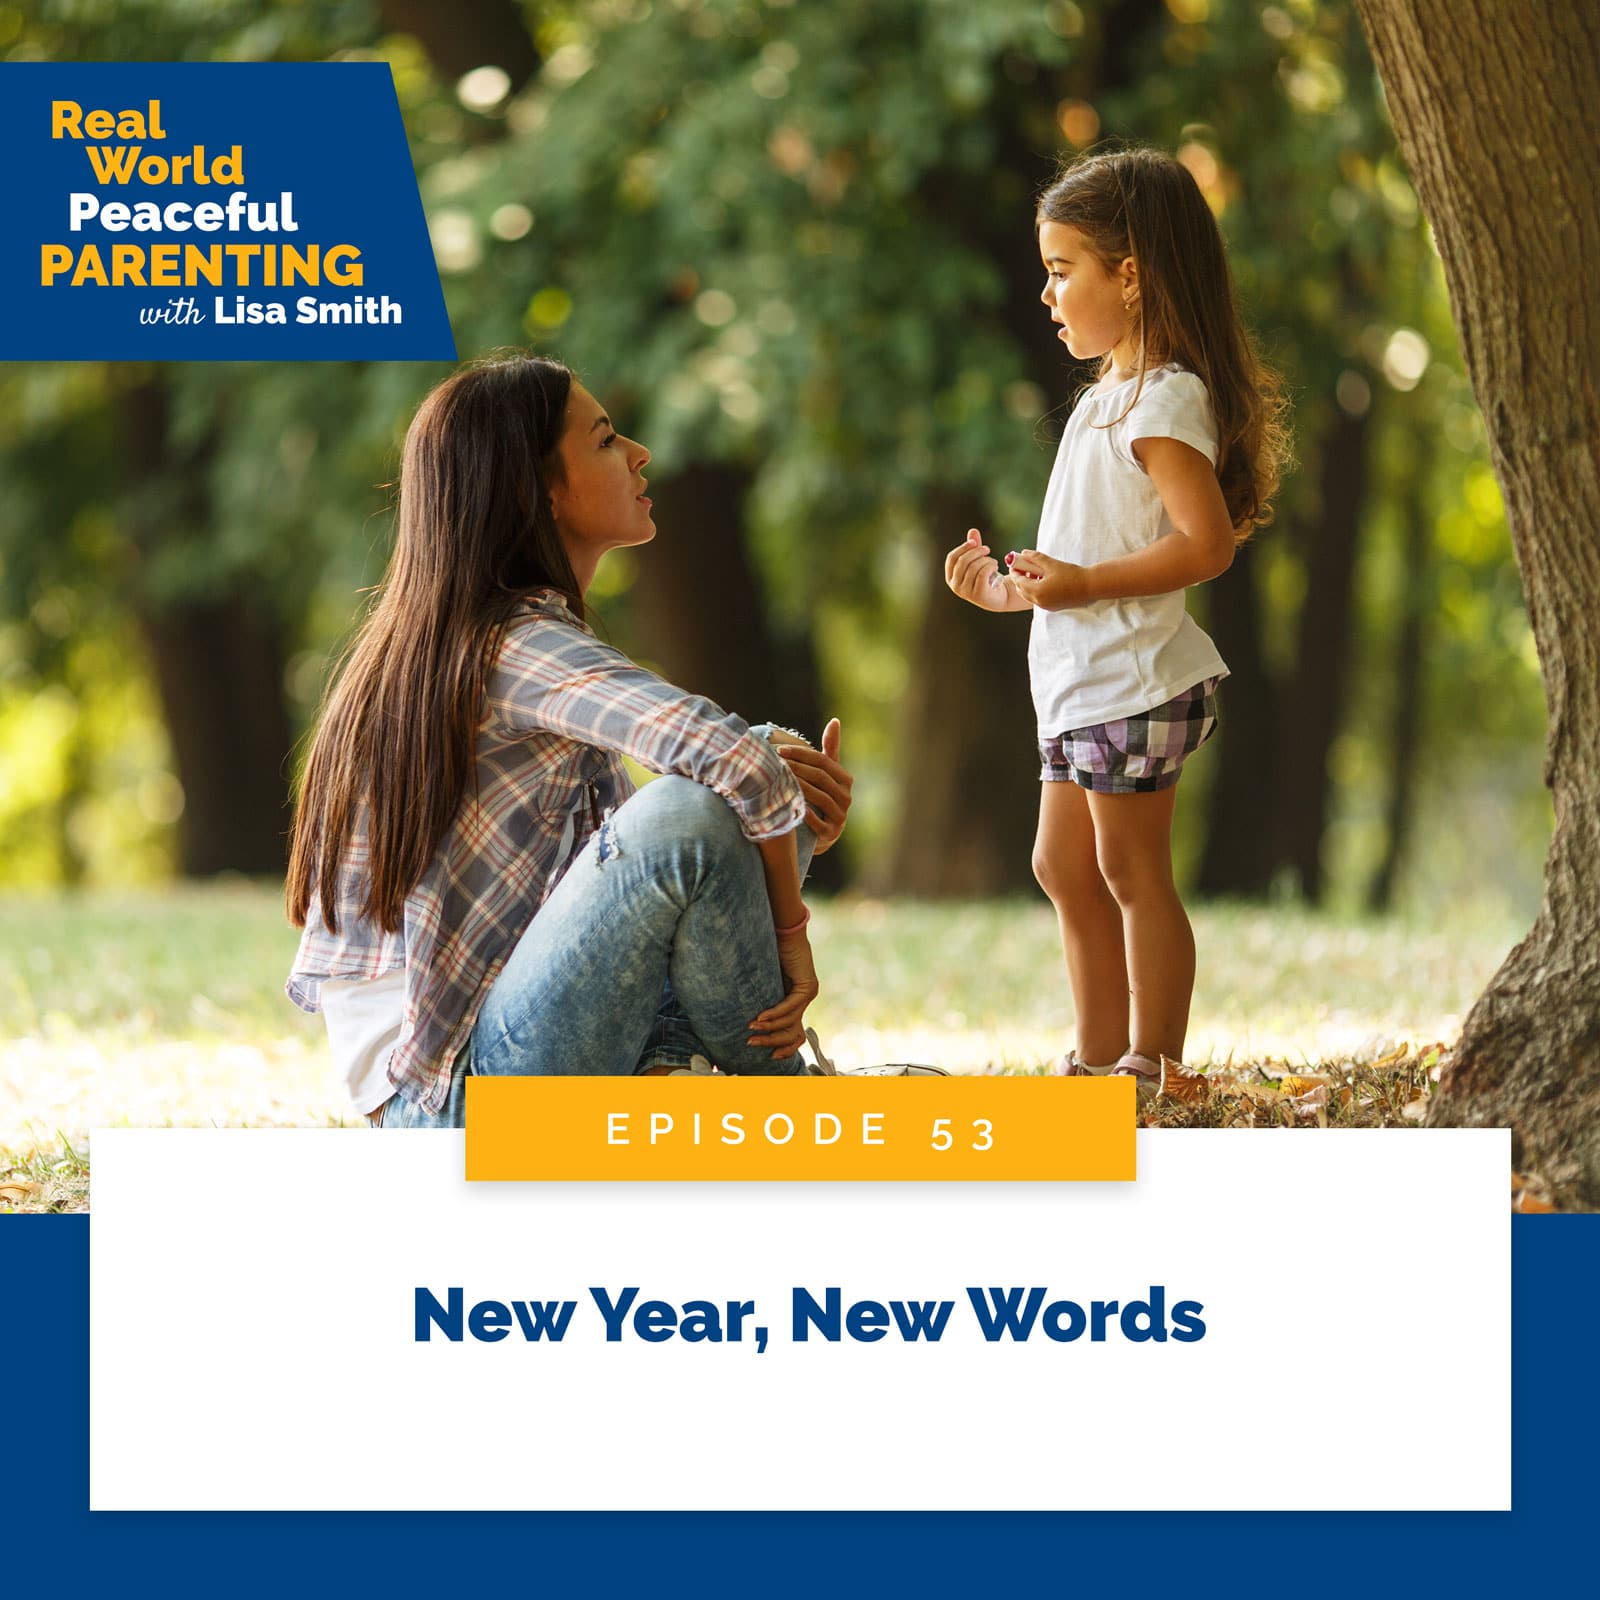 Real World Peaceful Parenting with Lisa Smith | New Year, New Words